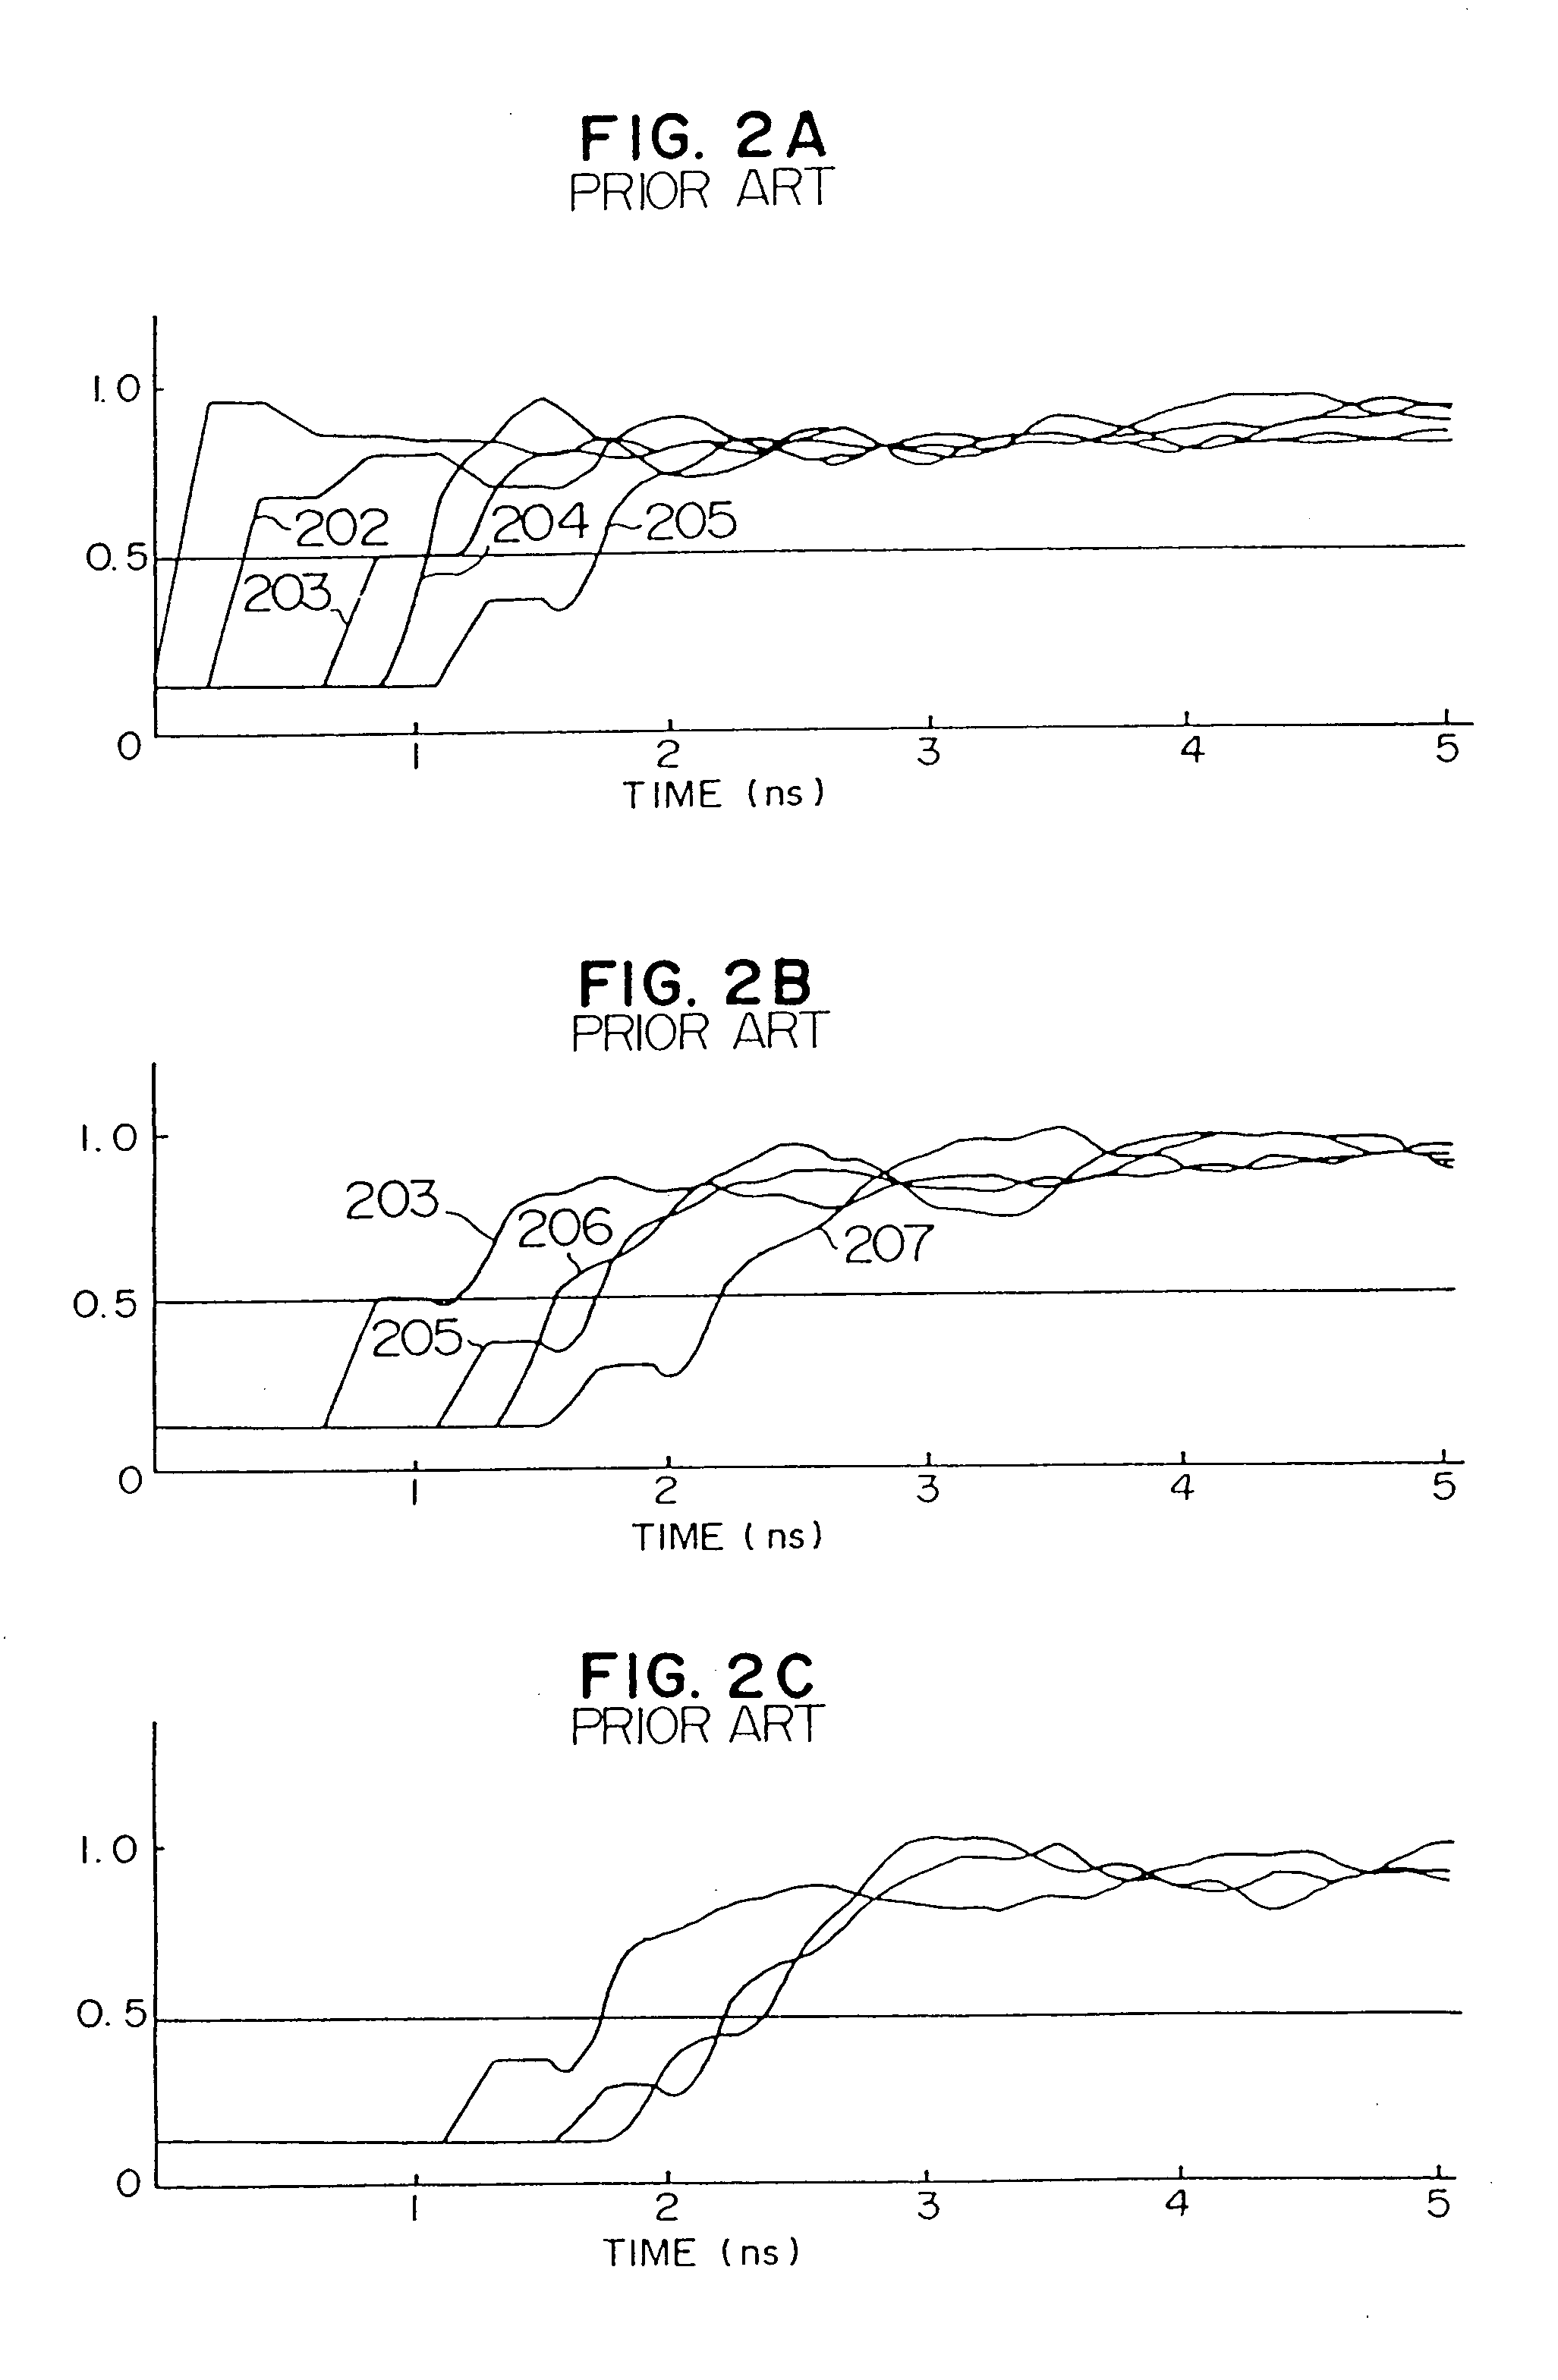 Signal transmitting device suited to fast signal transmission